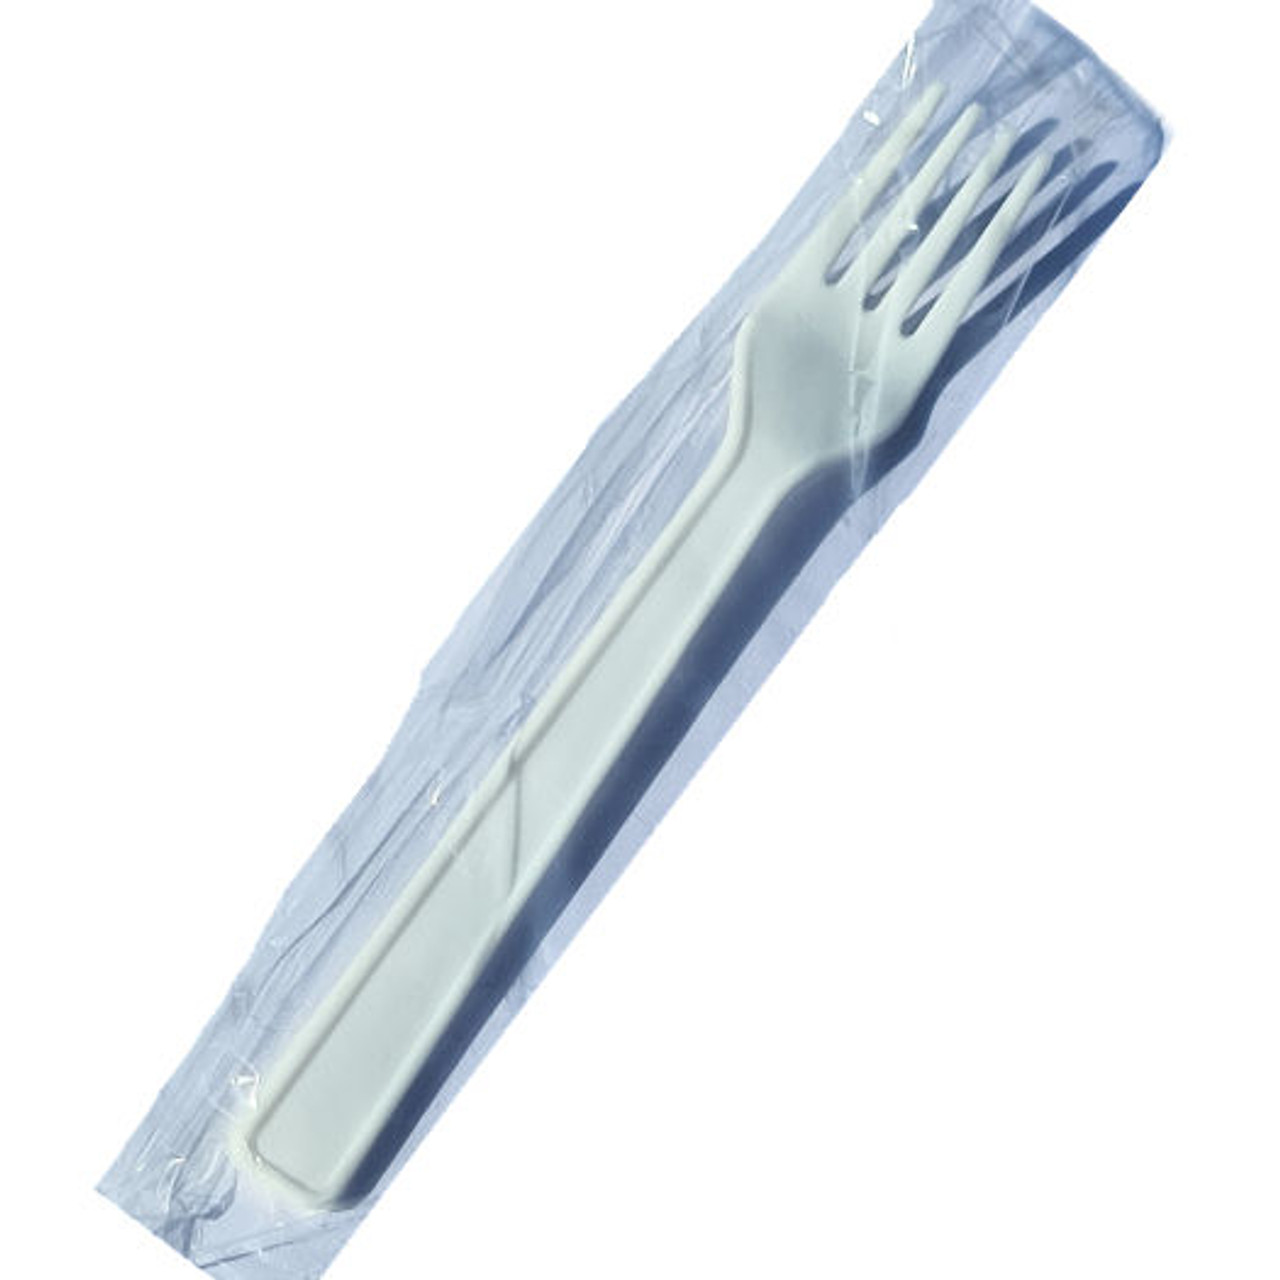 25 Packs of Individually Wrapped White Forks